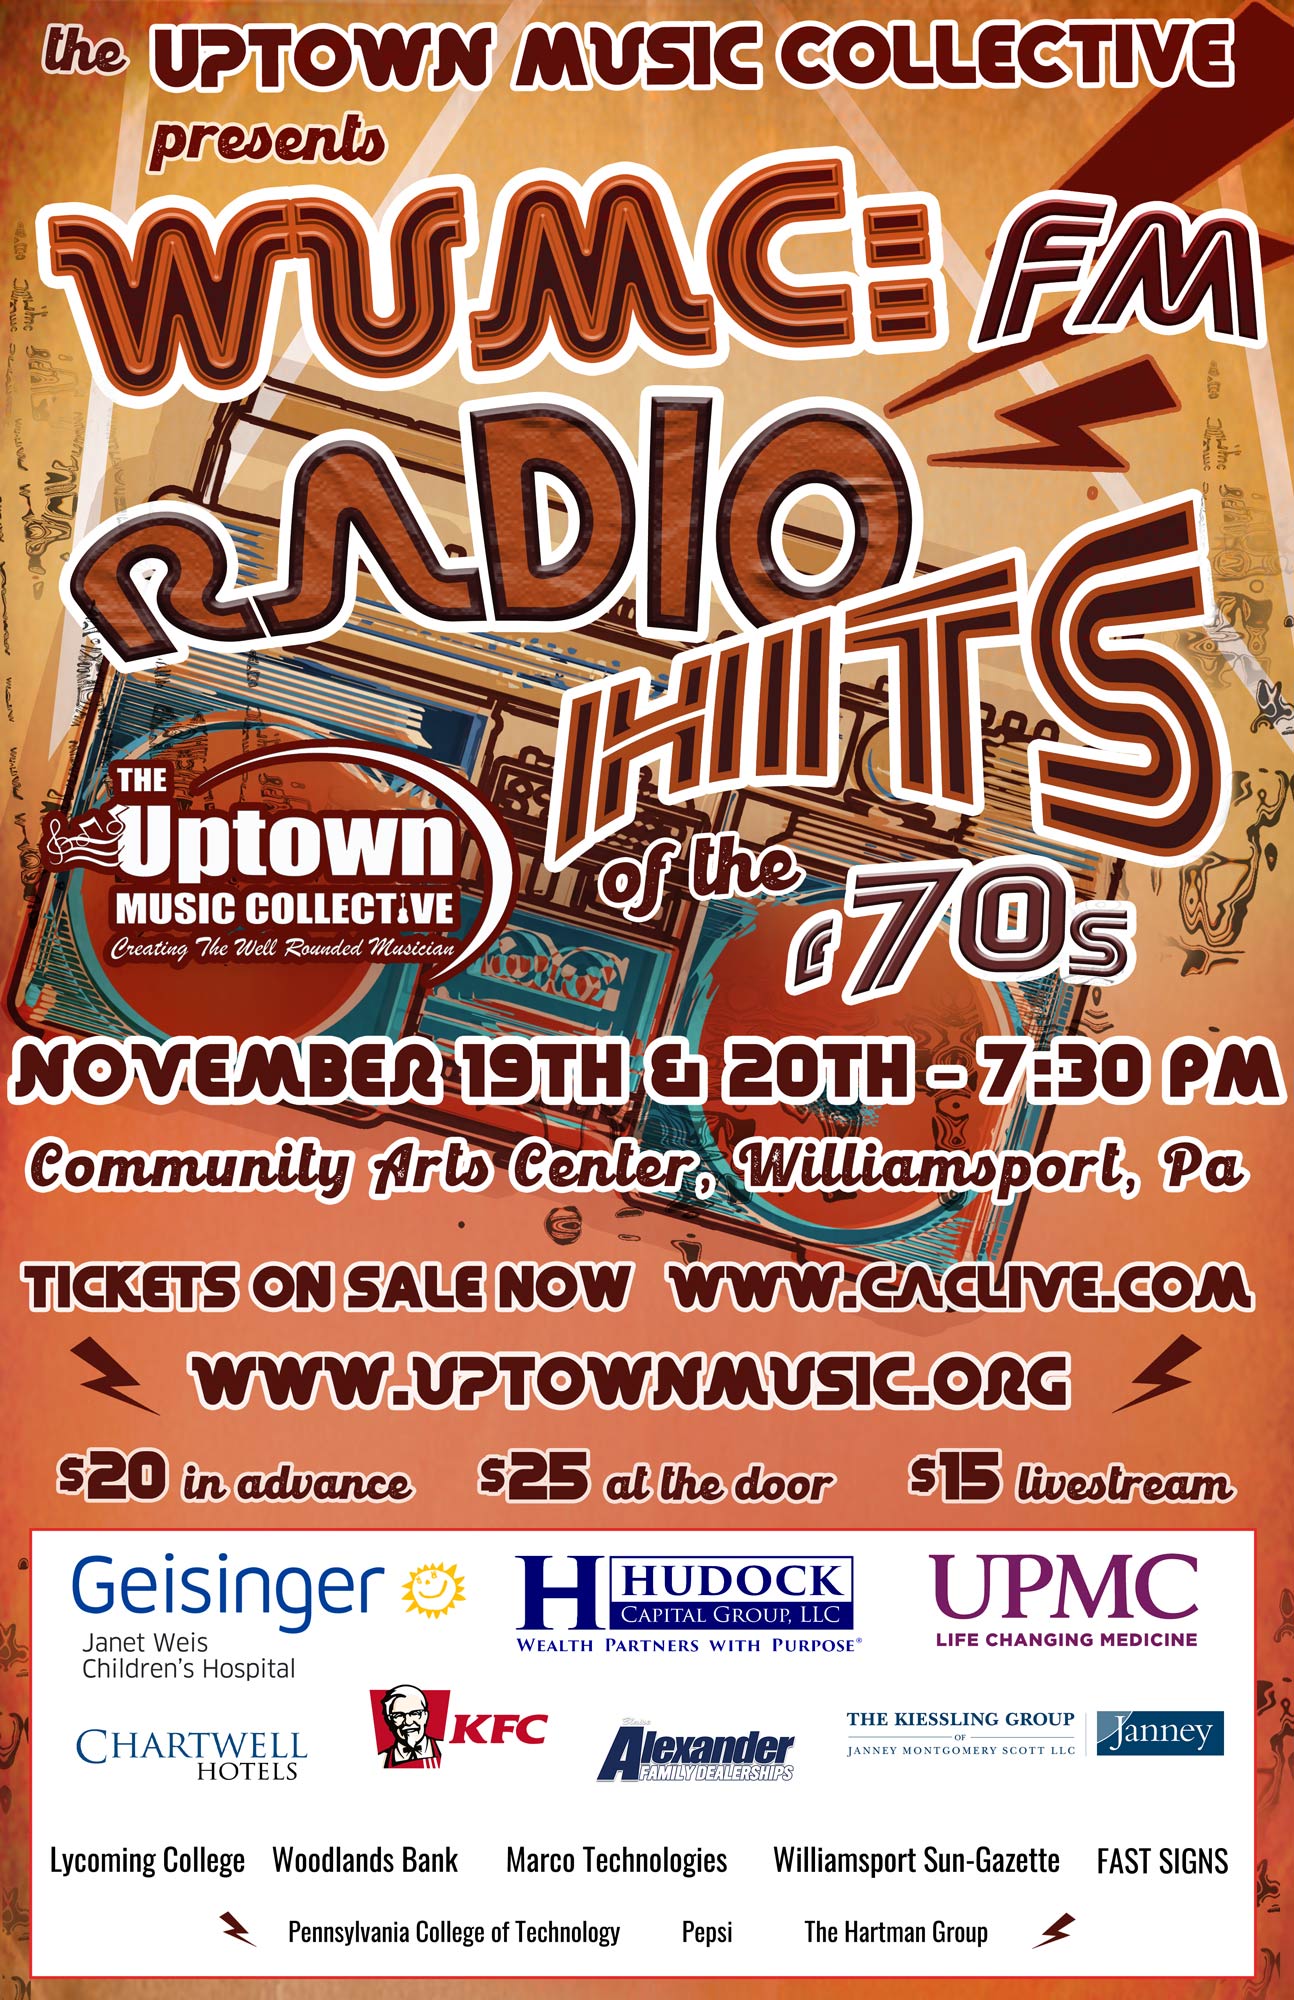 The Uptown Music Collective presents WUMC: FM Radio Hits of the '70s